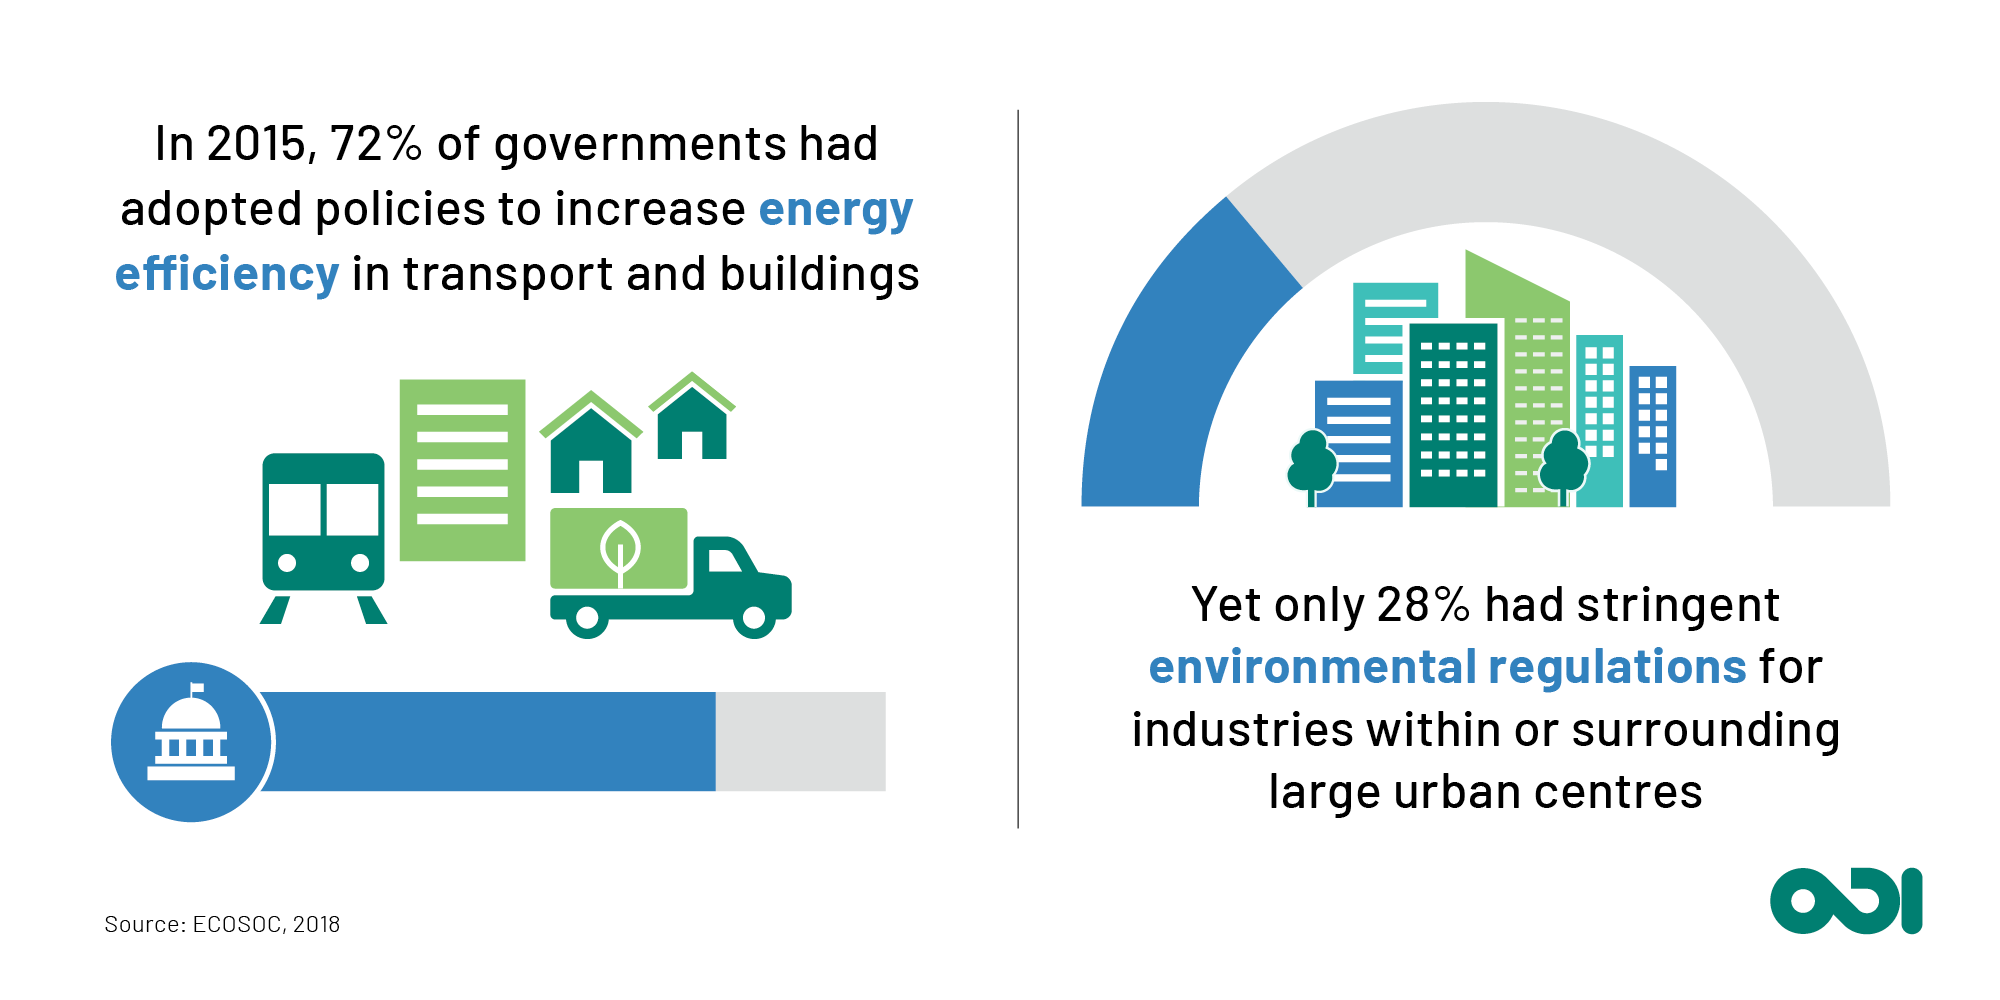 In 2015, 72% of governments had adopted energy efficiency policies for transport and buildings, yet only 28% had stringent environmental regulations for industries within or surrounding large urban areas